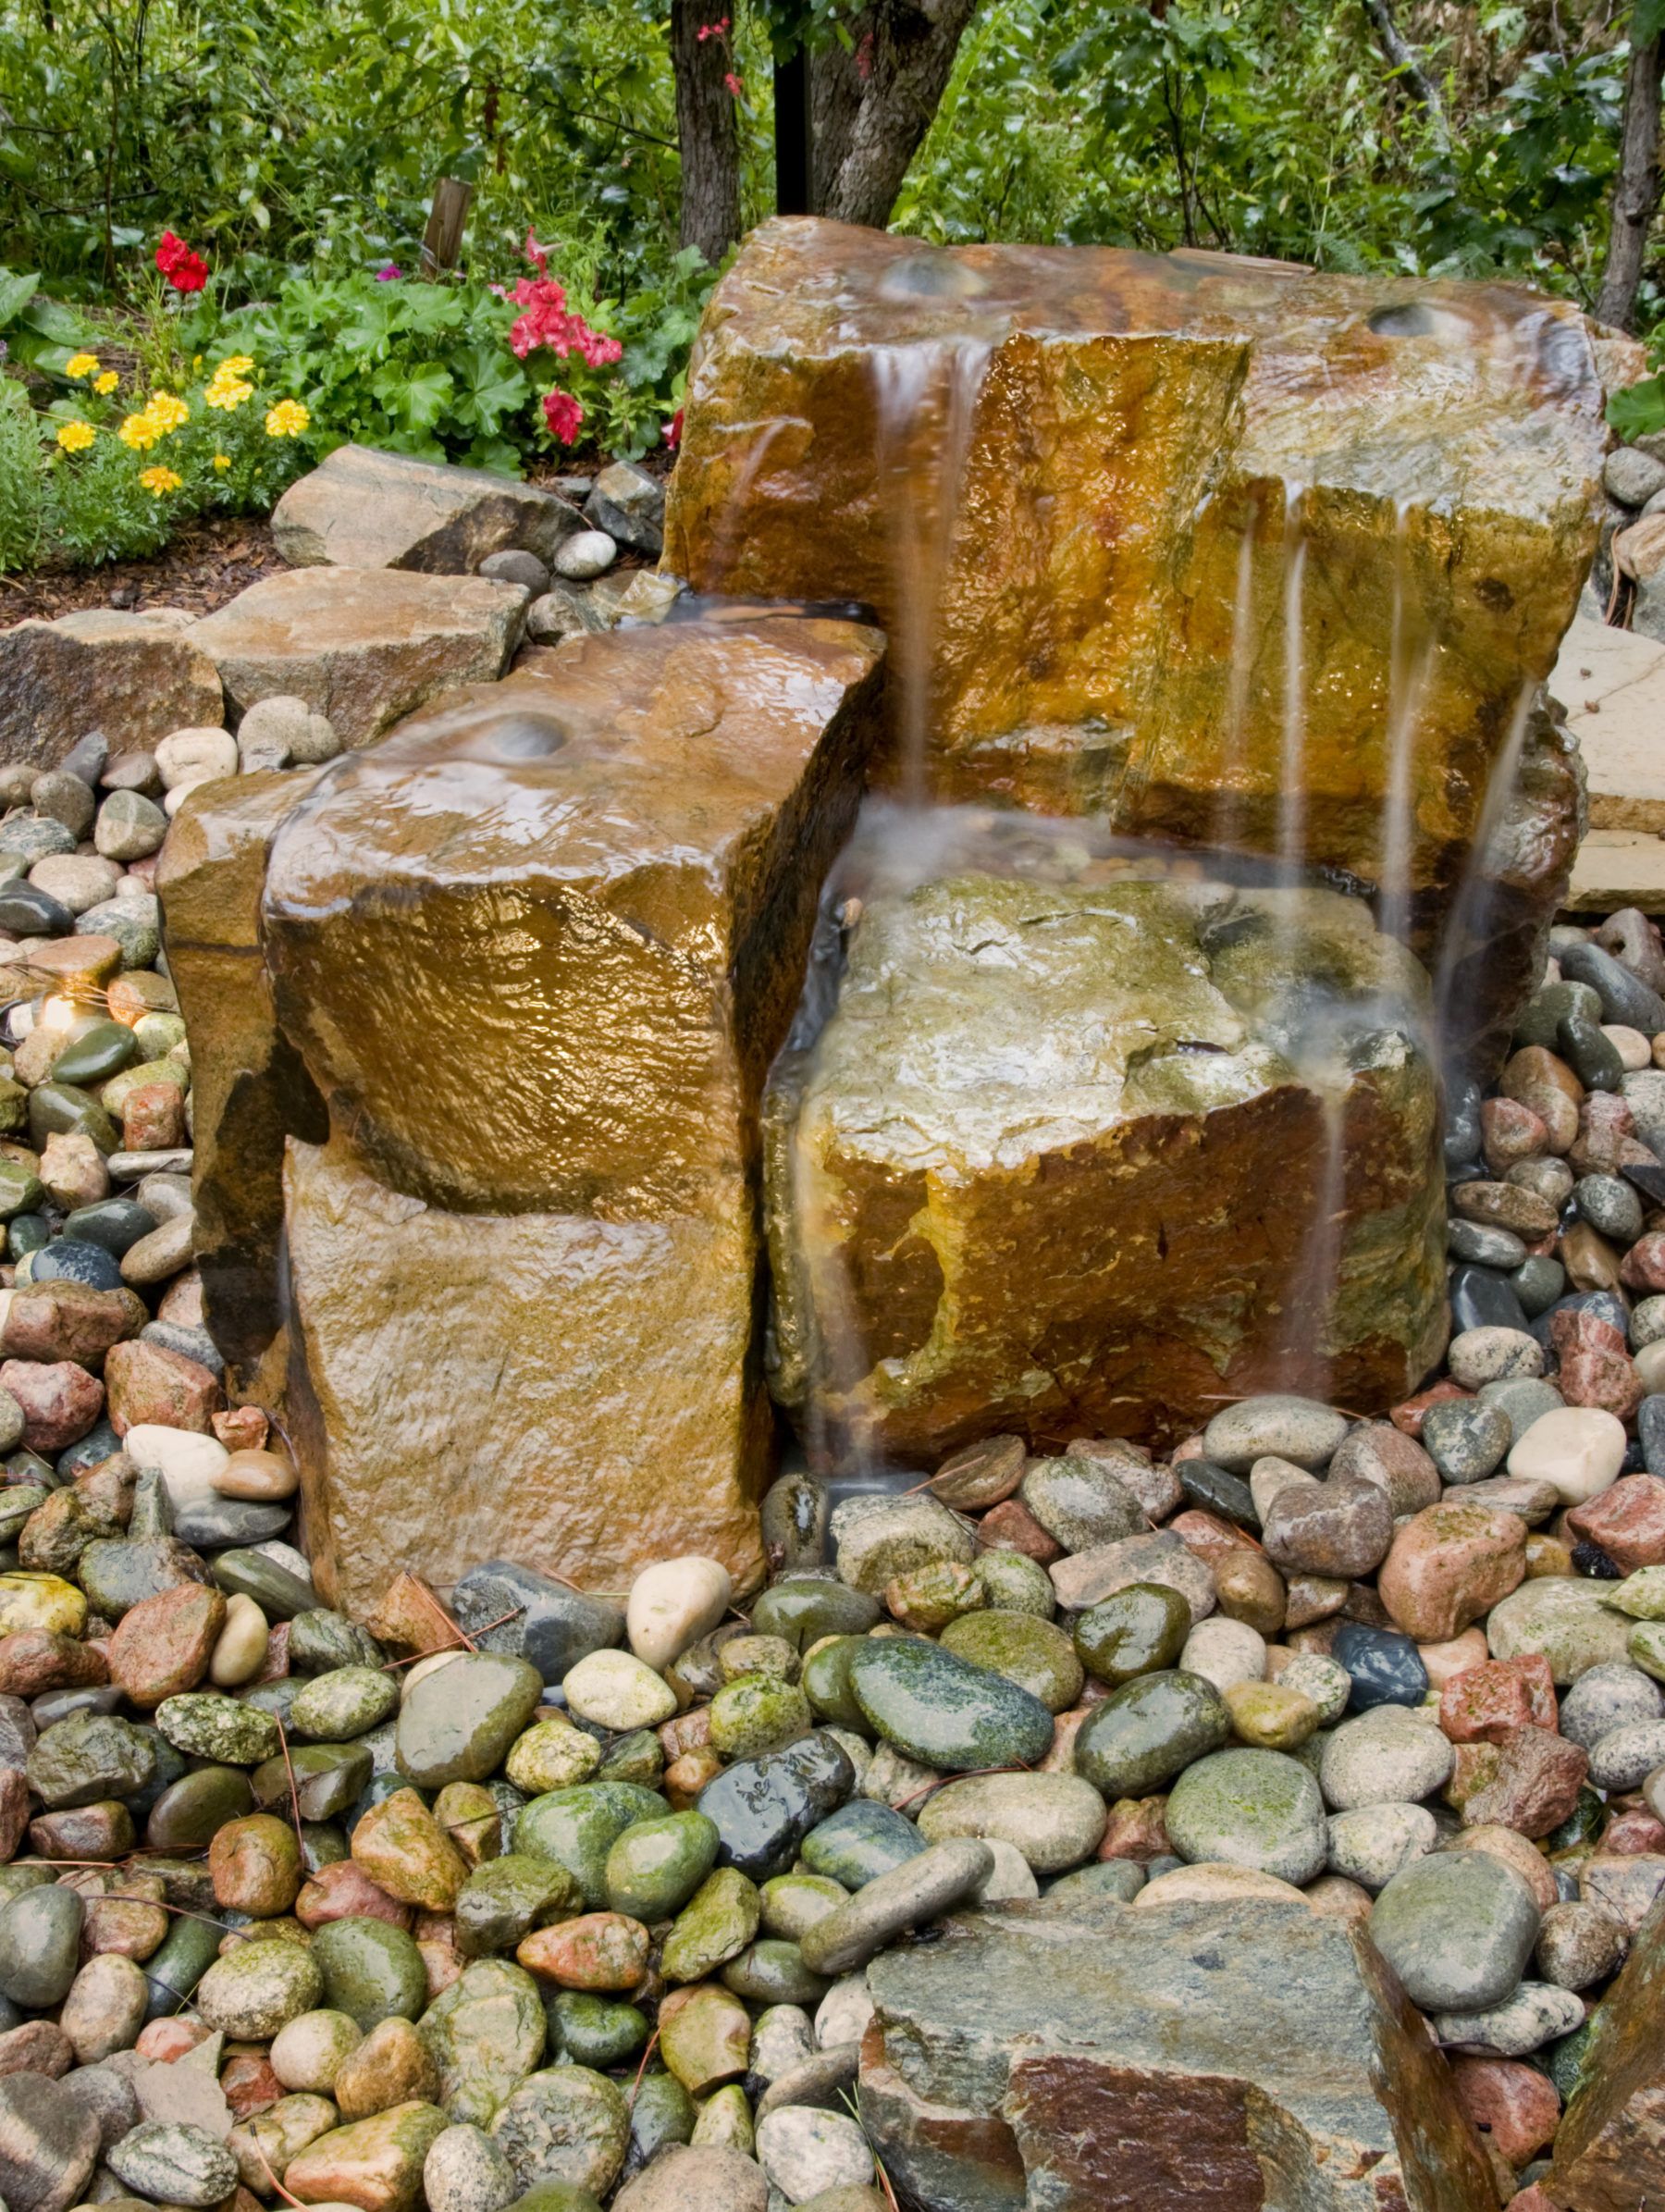 Large Lighted Rock Fountain